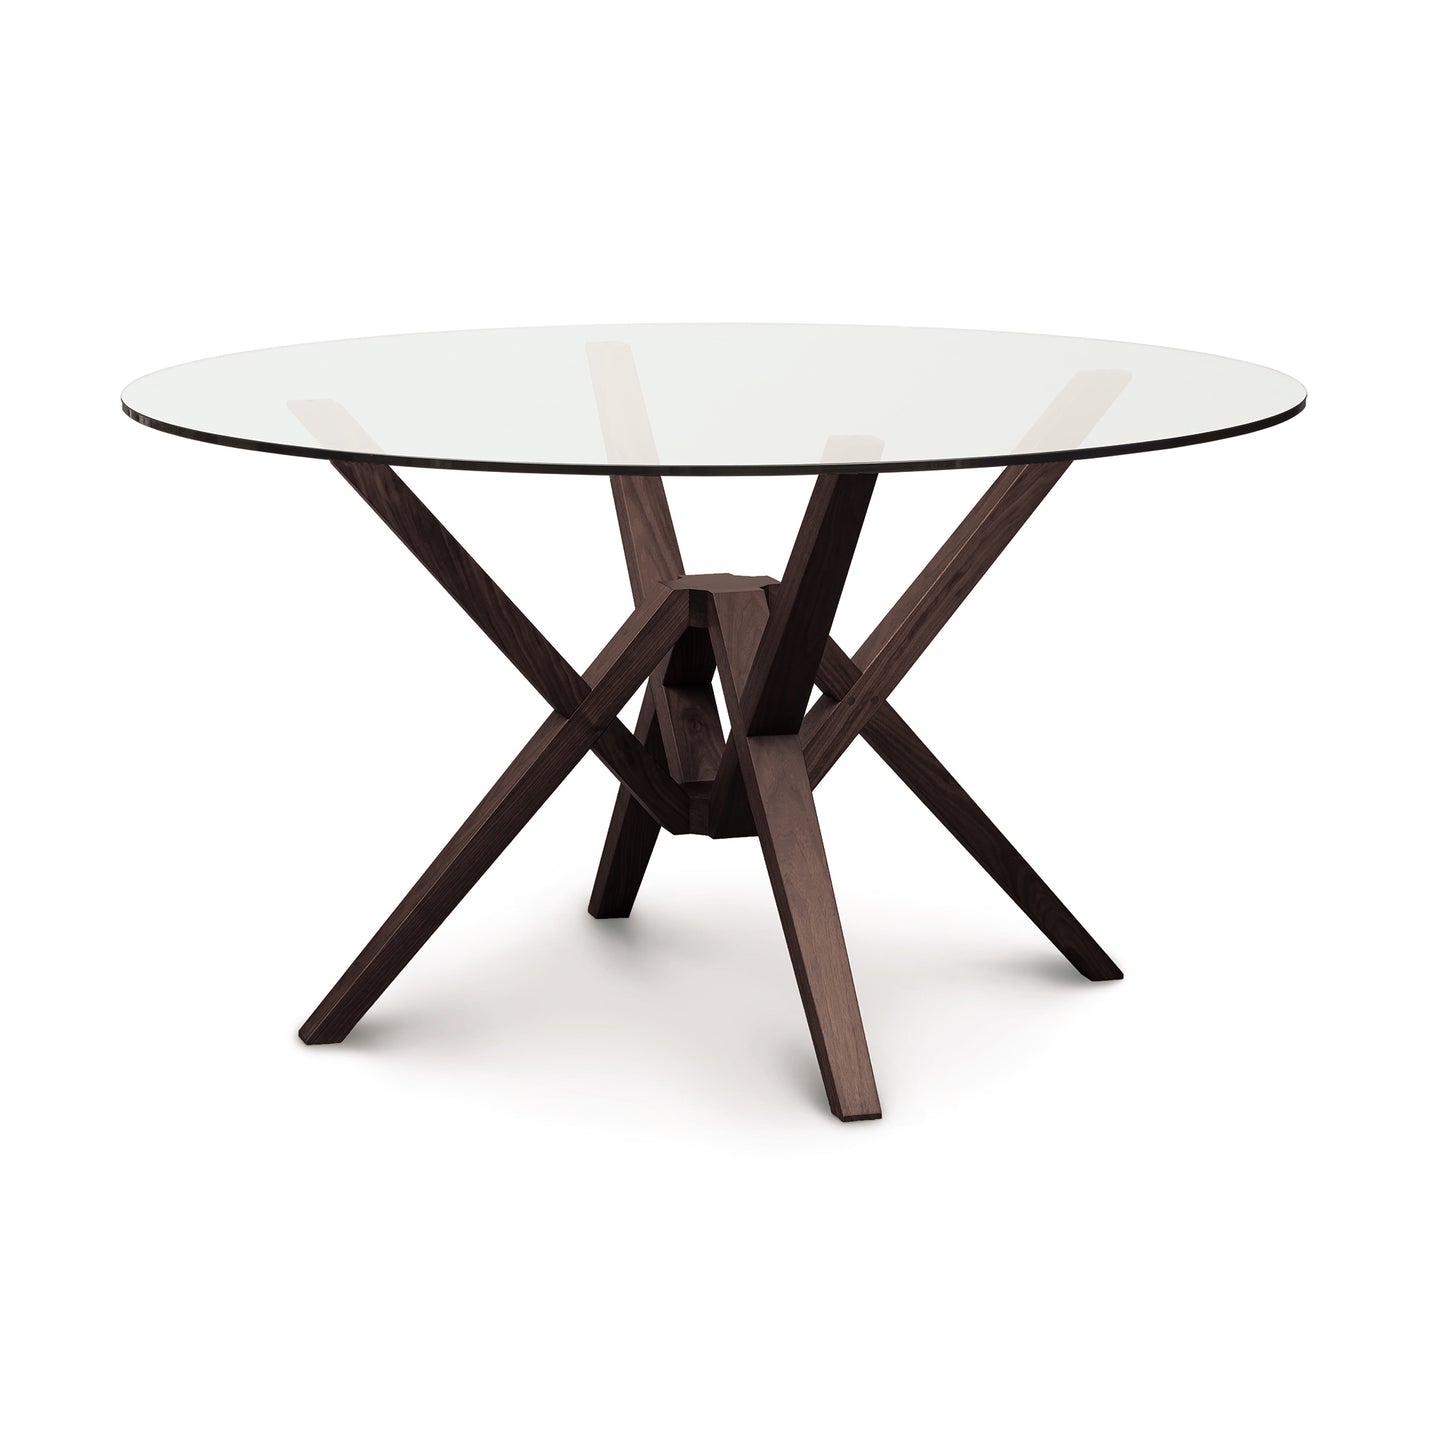 A Copeland Furniture Exeter Round Glass Top Table with a wooden base showcasing innovative engineering and isometric design.